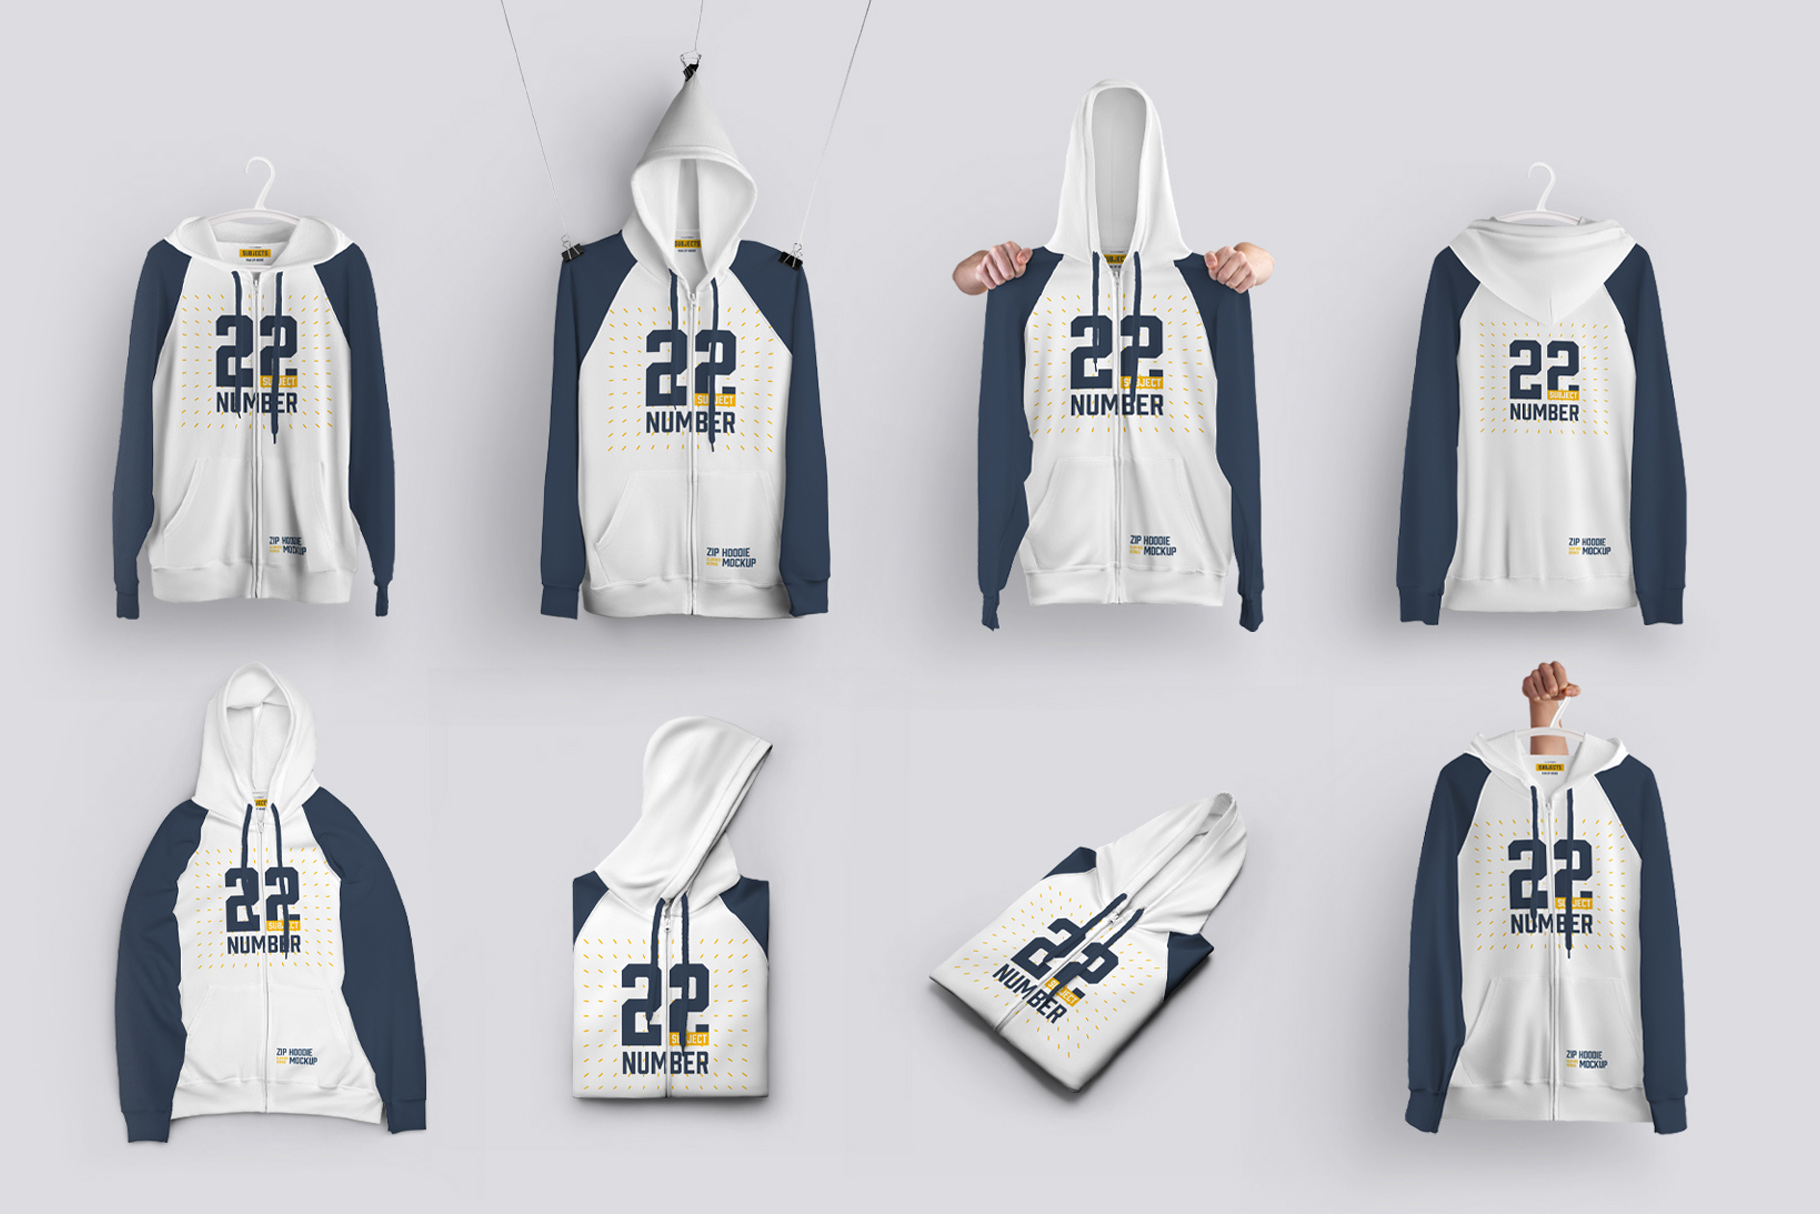 24 Zip Hoodie Mockup Collection #5 Isoleted Items Example.